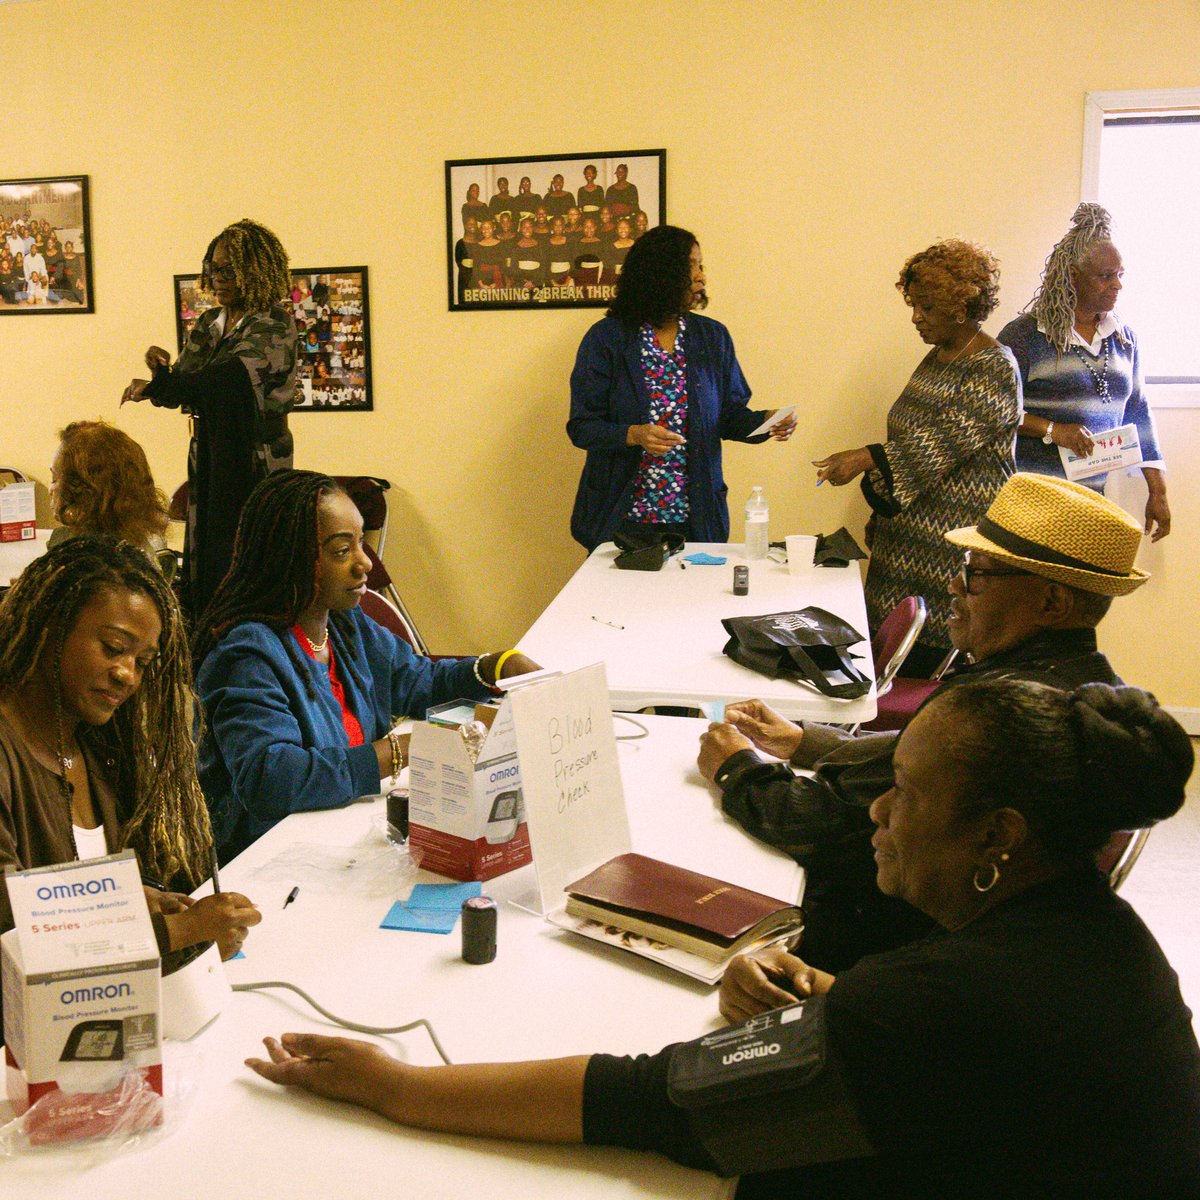 Yesterday's event in Montgomery was incredible! From screenings to discussions, we connected deeply with the community. Now, we're in Atlanta for more screenings and discussions at St. Phillip AME Church. Your voice matters, so join us today! blackvotersmatterfund.org/tourstops/